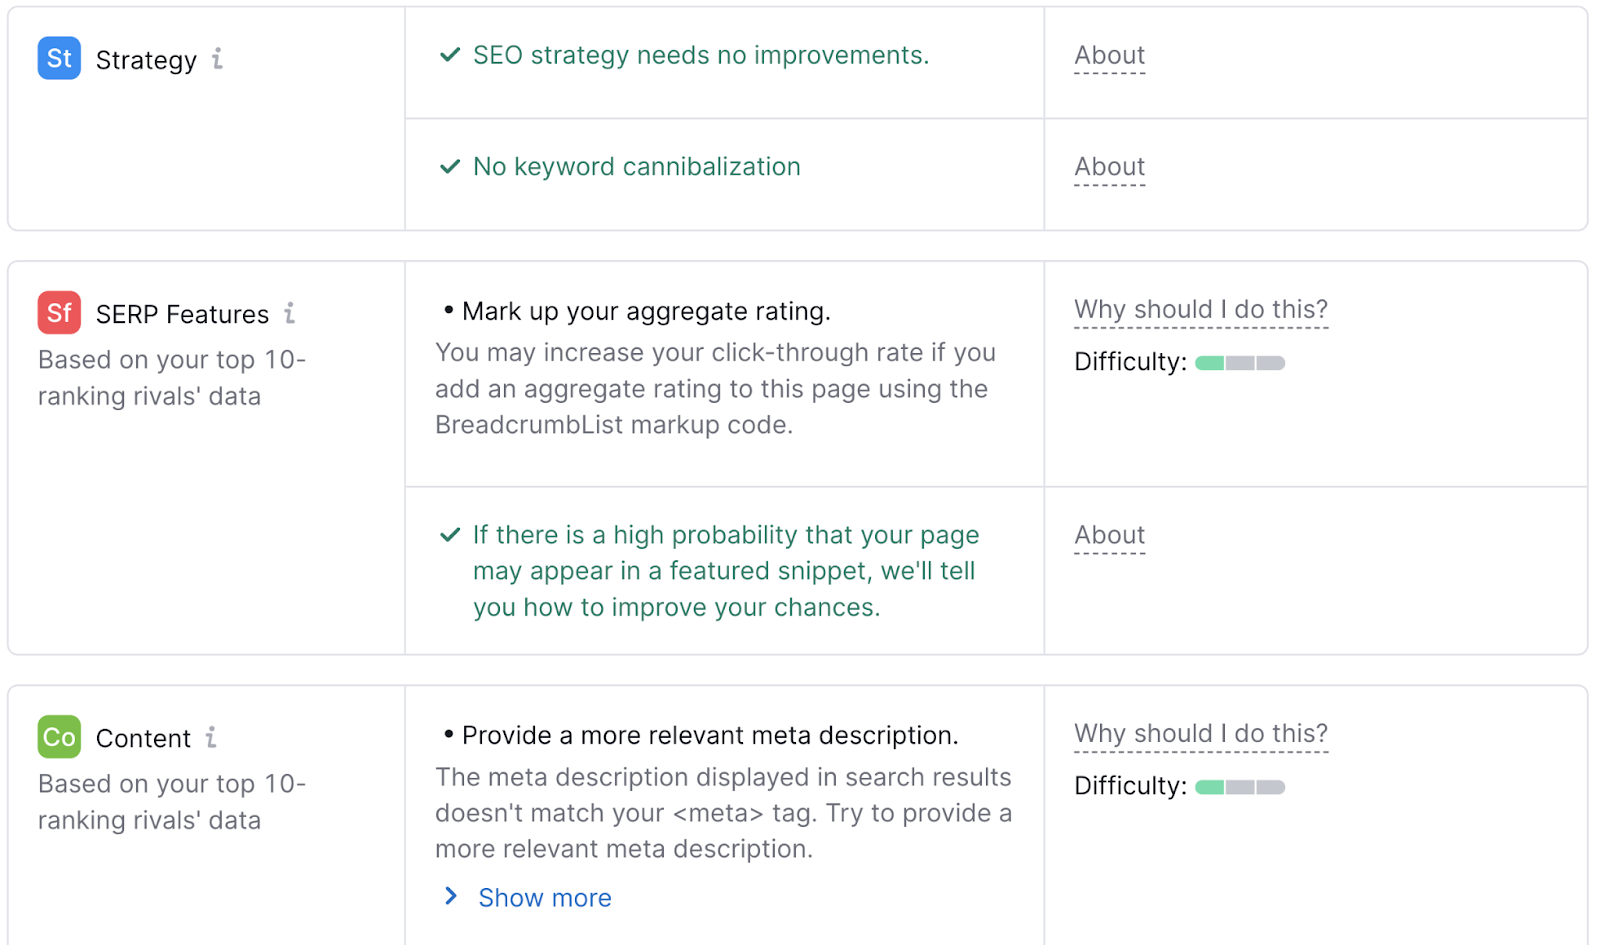 Optimization recommendations shown for strategy, SERP features, and content in On Page SEO Checker